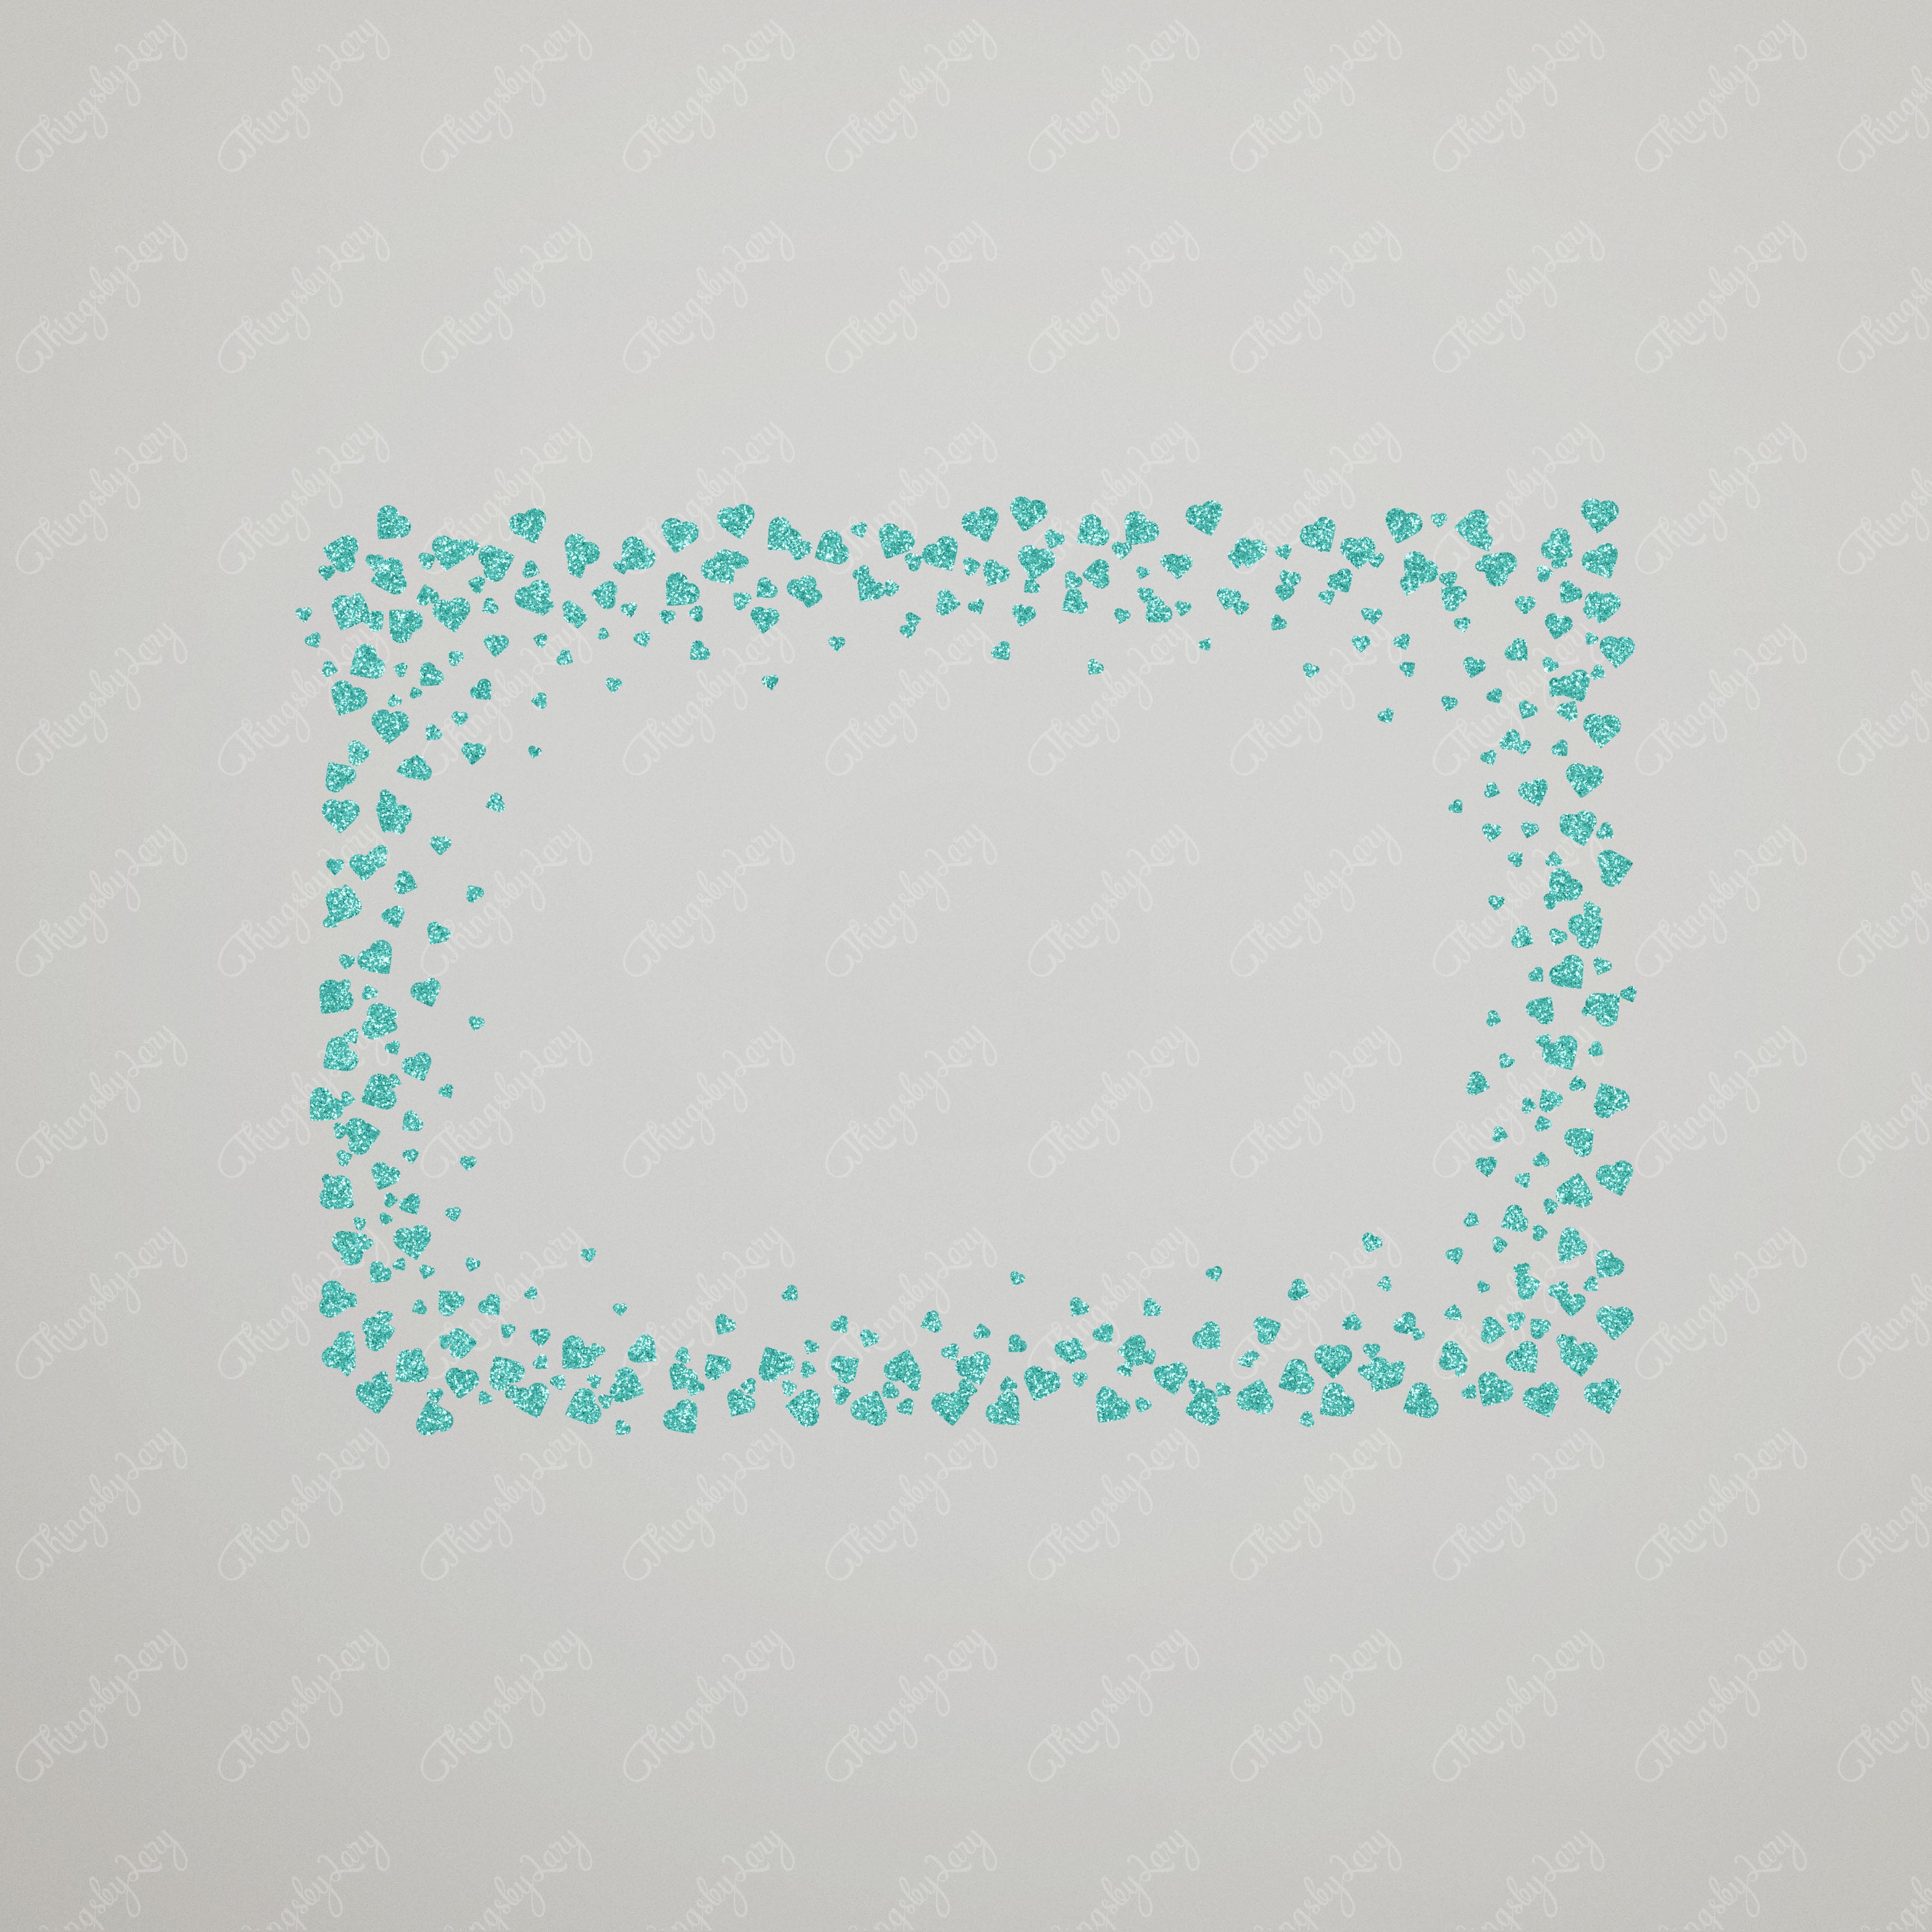 70 Turquoise Glitter Particles Set PNG Overlay Images